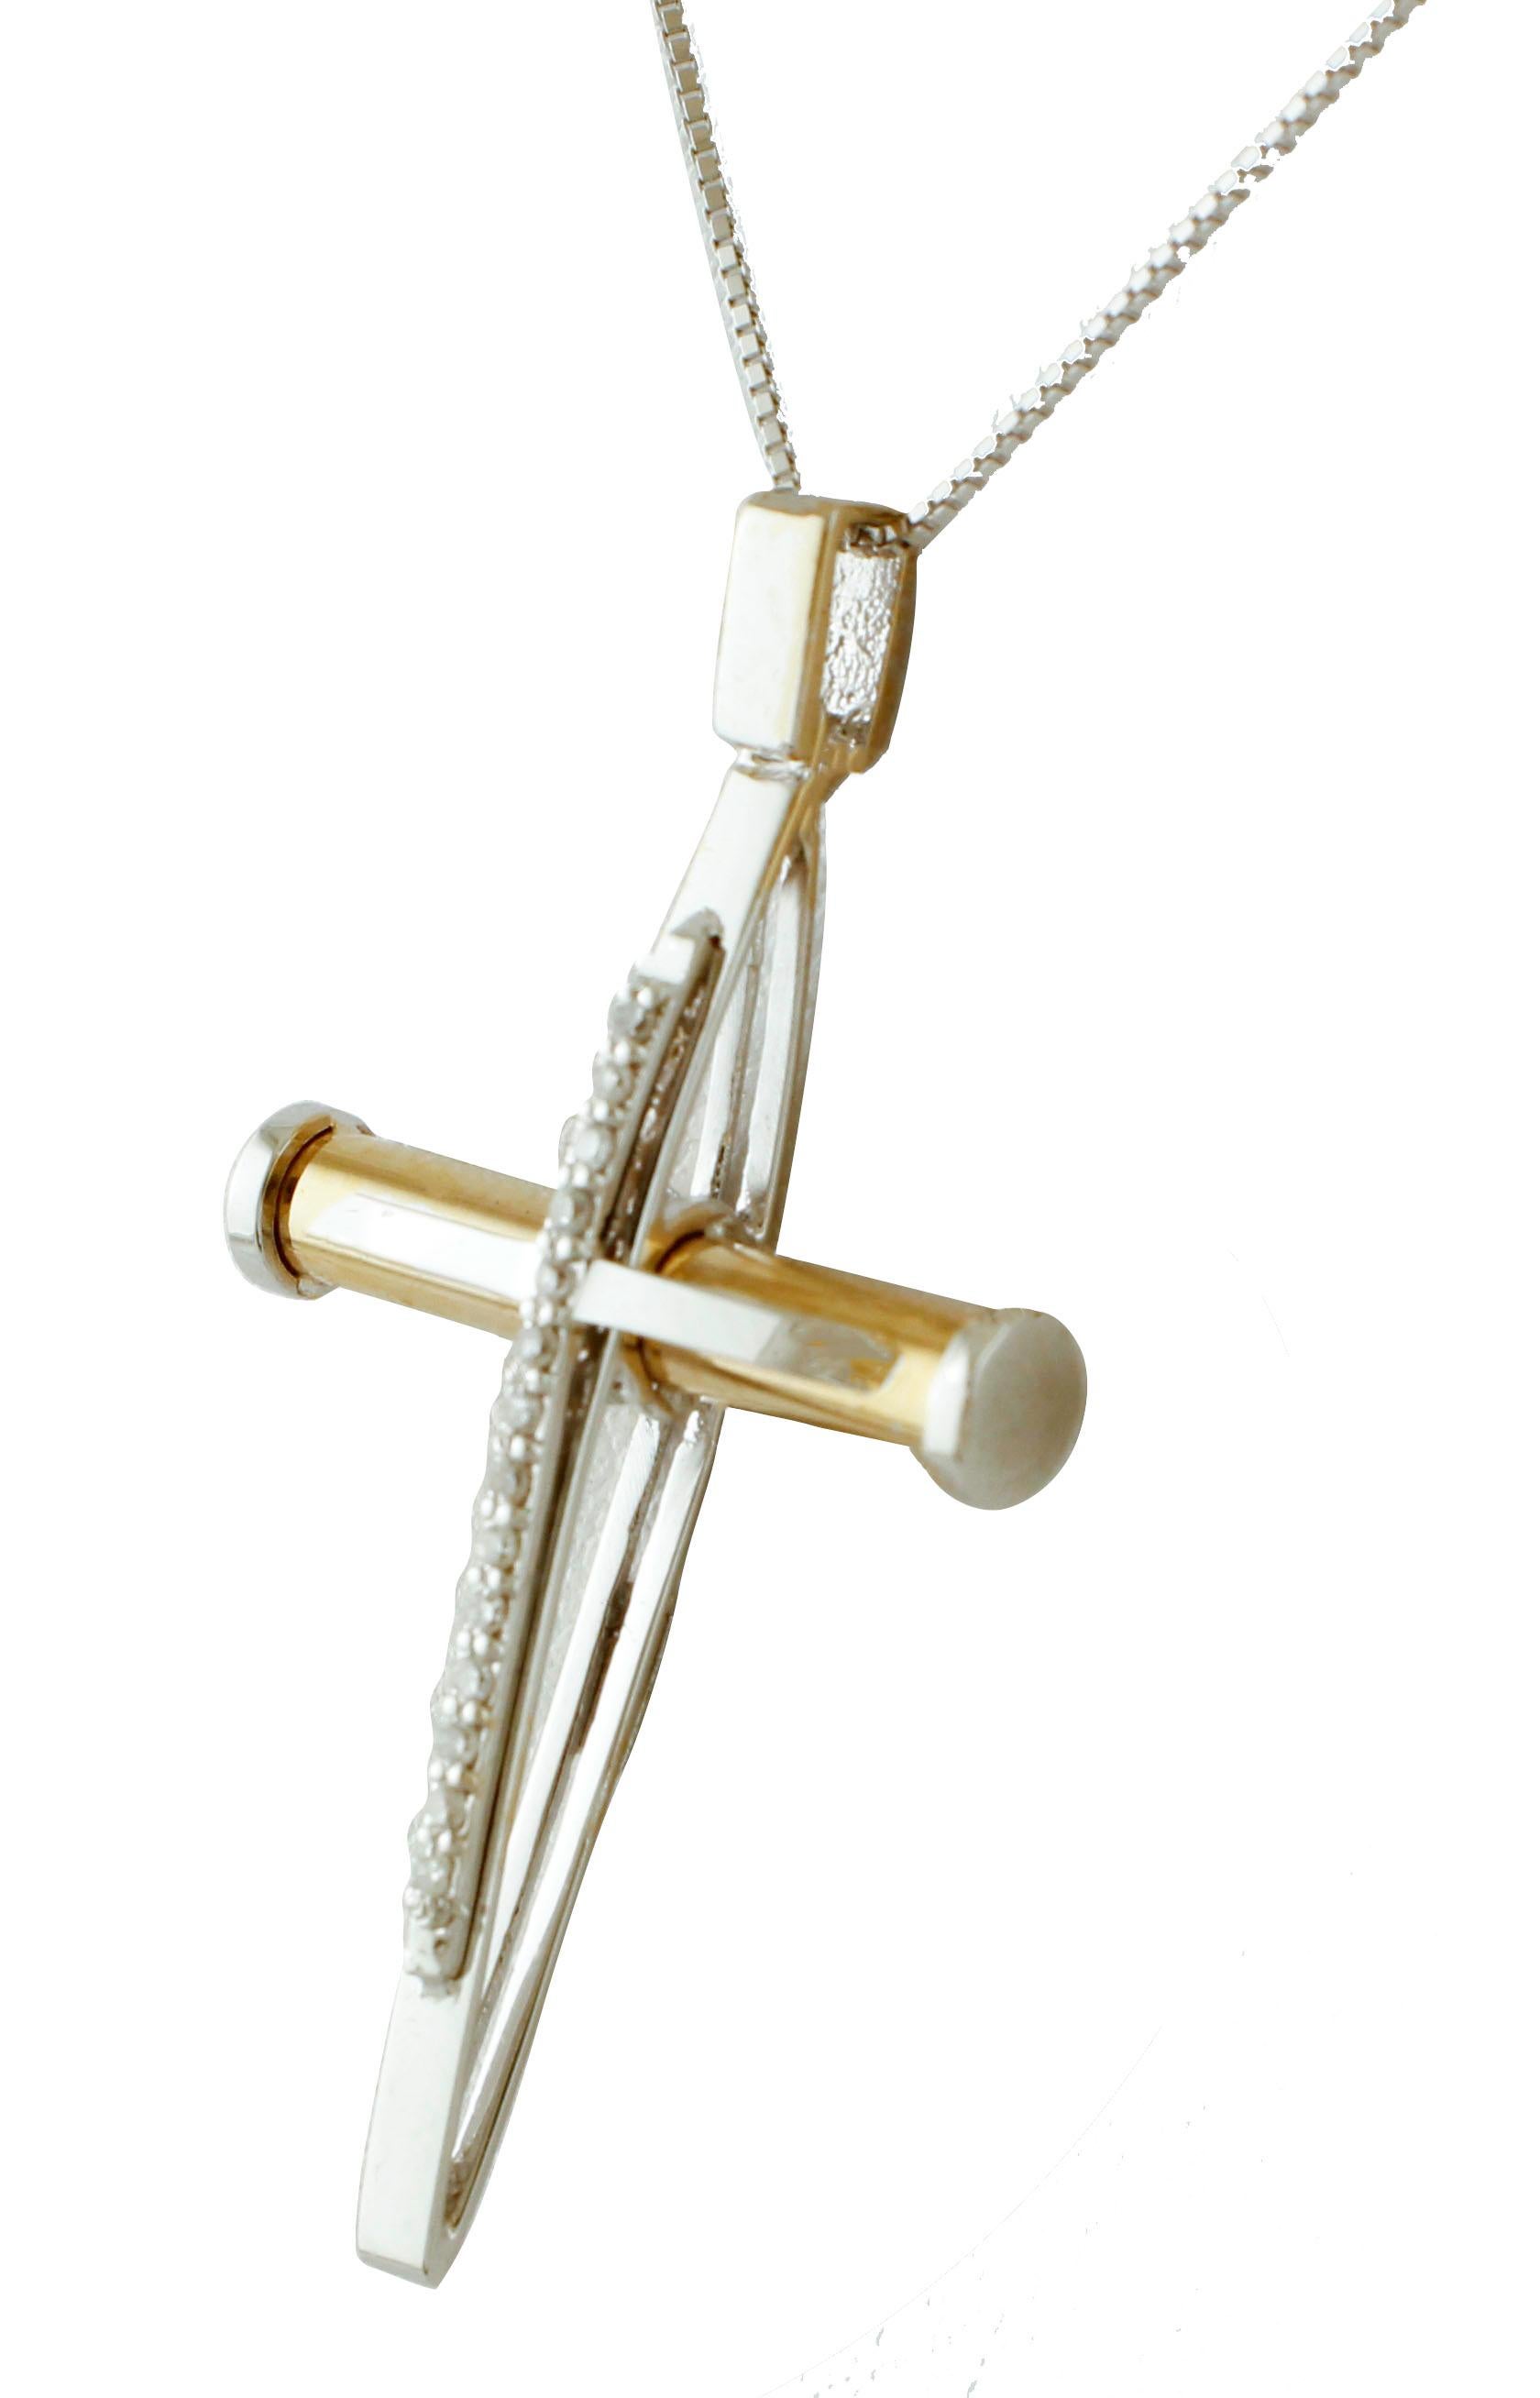 SHIPPING POLICY:
No additional costs will be added to this order.
Shipping costs will be totally covered by the seller (customs duties included).

Simple and elegant cross shape pendant necklace relized in 18K rose and white gold embellished with